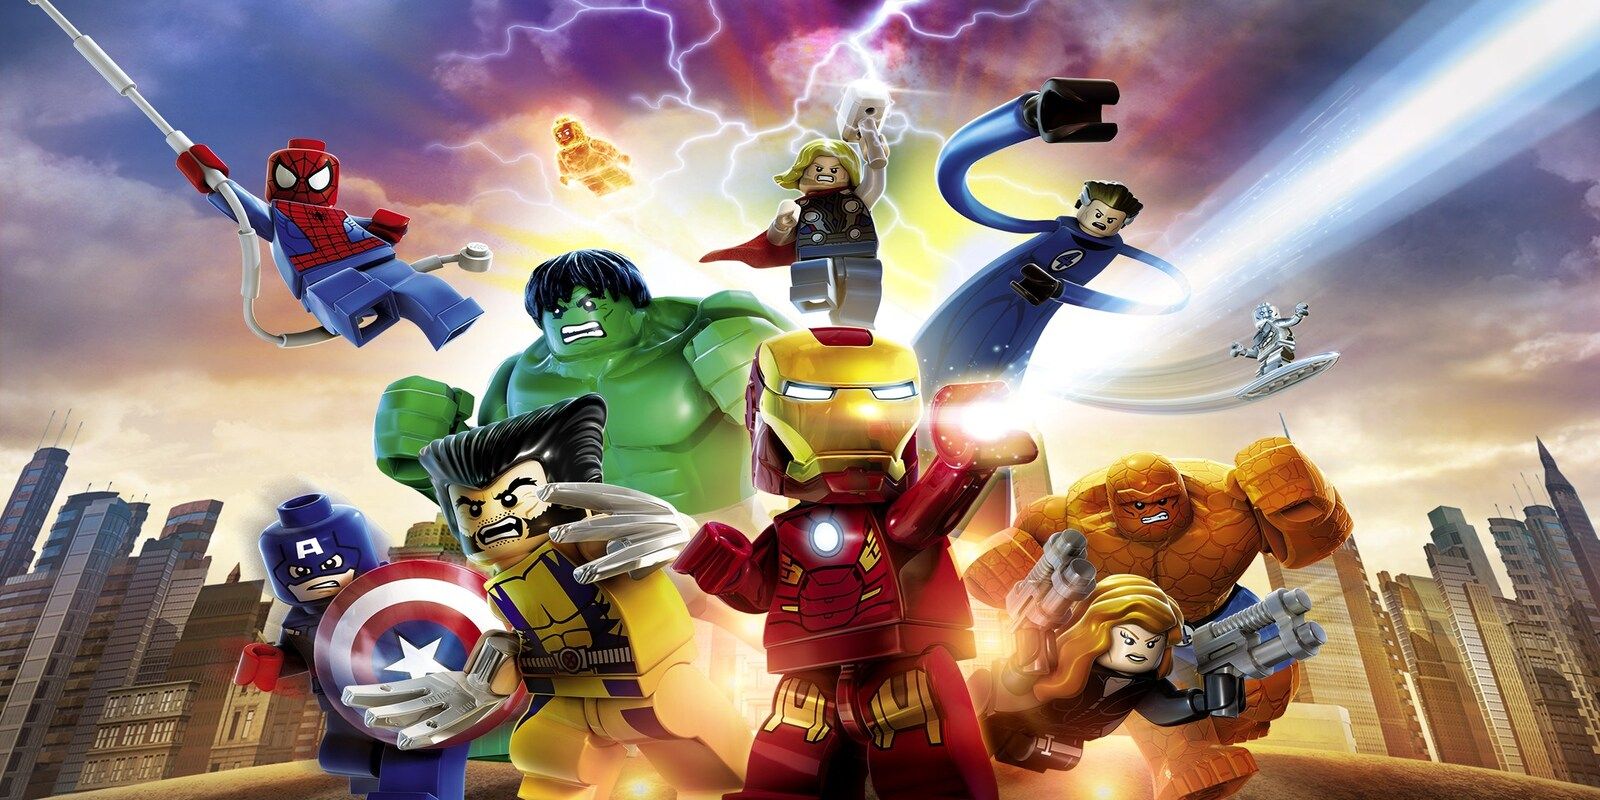 Lego Marvel Super Heroes Iron Man in front with Hulk Thor Spiderman Captain America Hulk and others in back